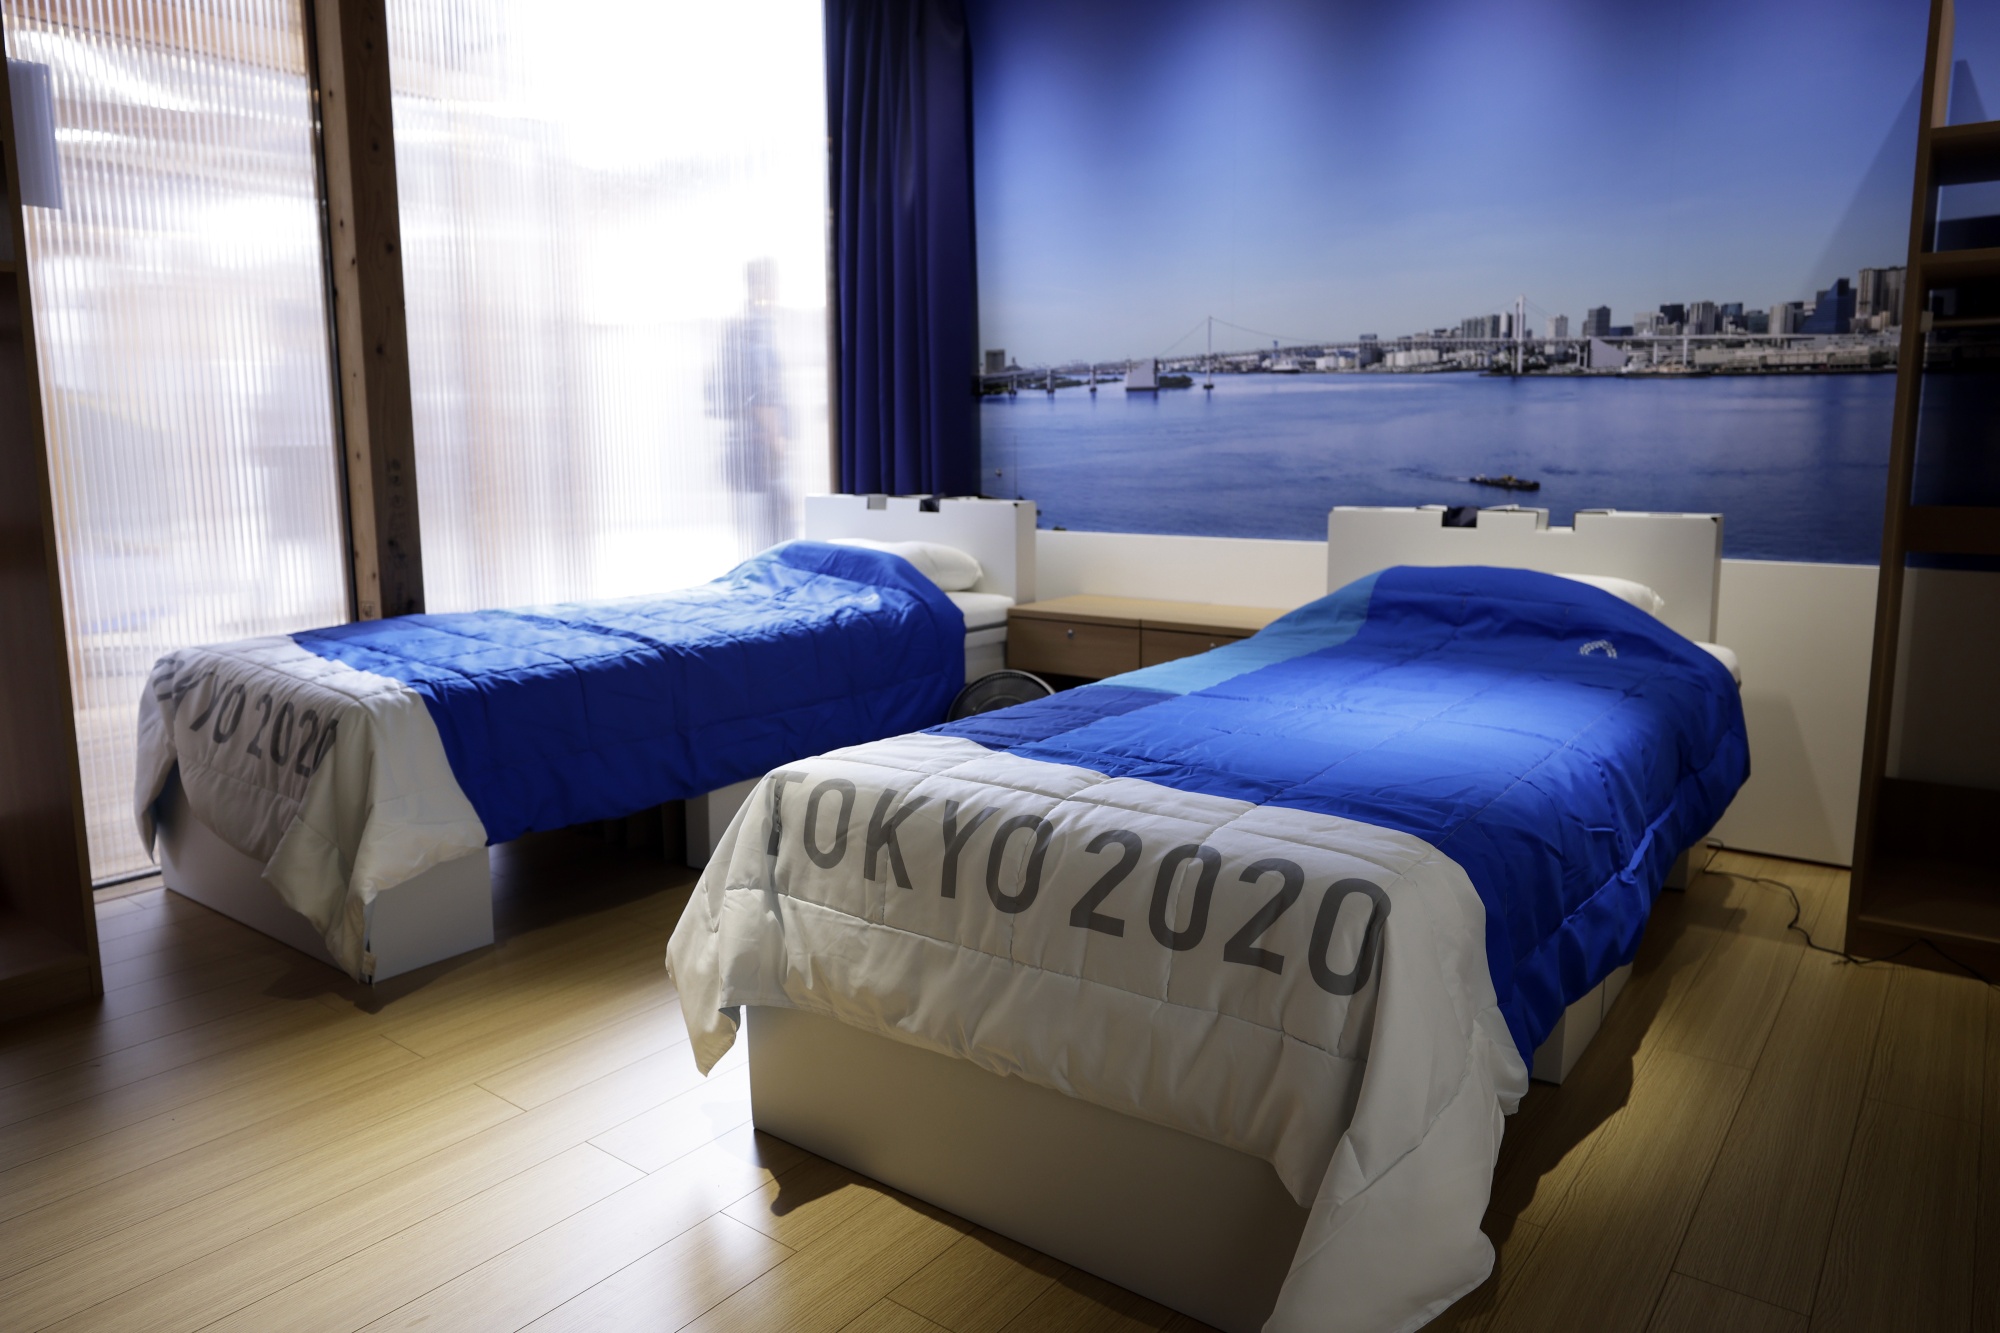 Where to Stay in Tokyo for the 2020 Olympics